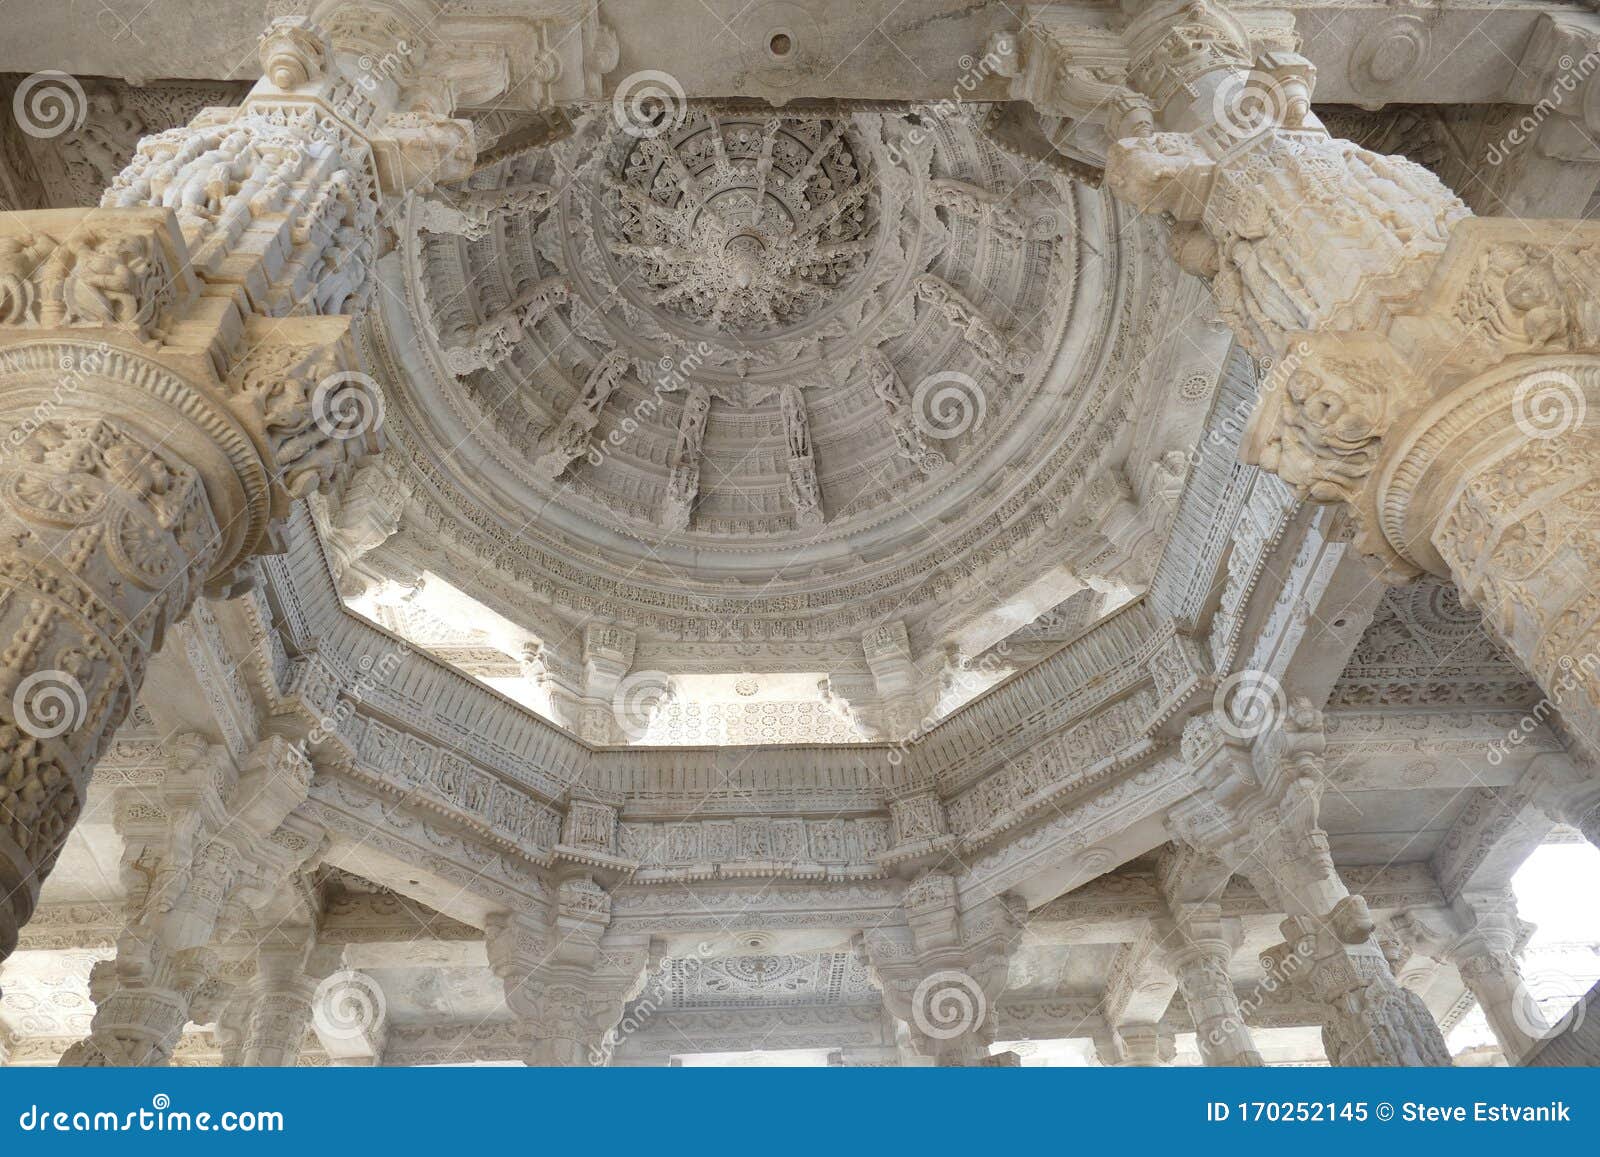 carved marble dome of jain temple at ranakpur